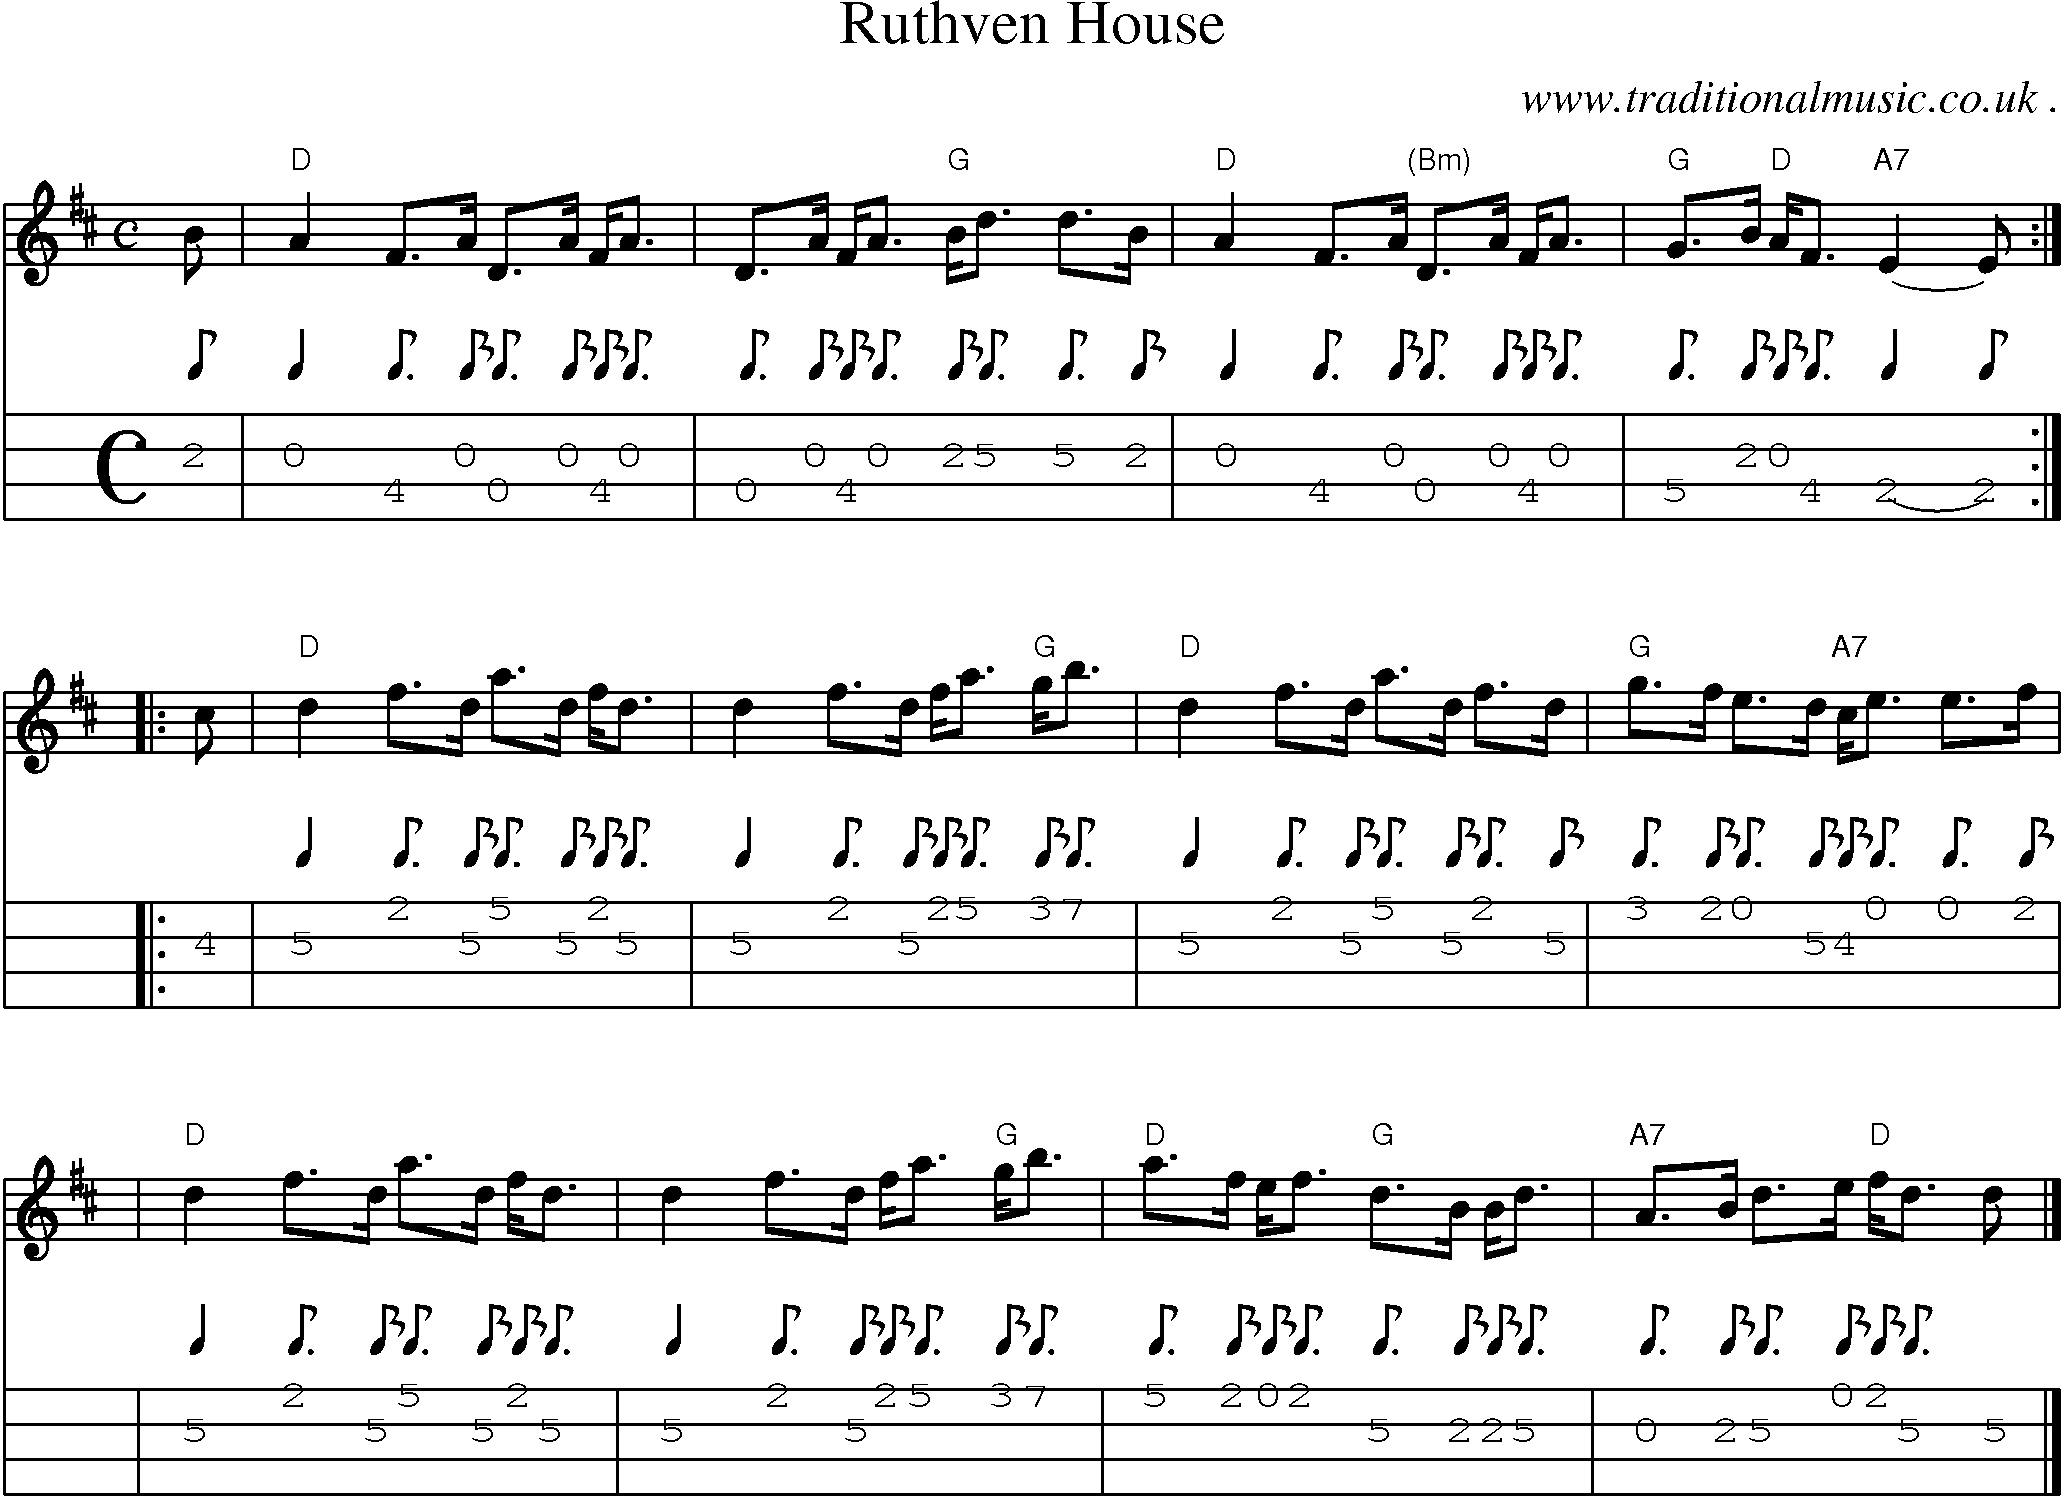 Sheet-music  score, Chords and Mandolin Tabs for Ruthven House